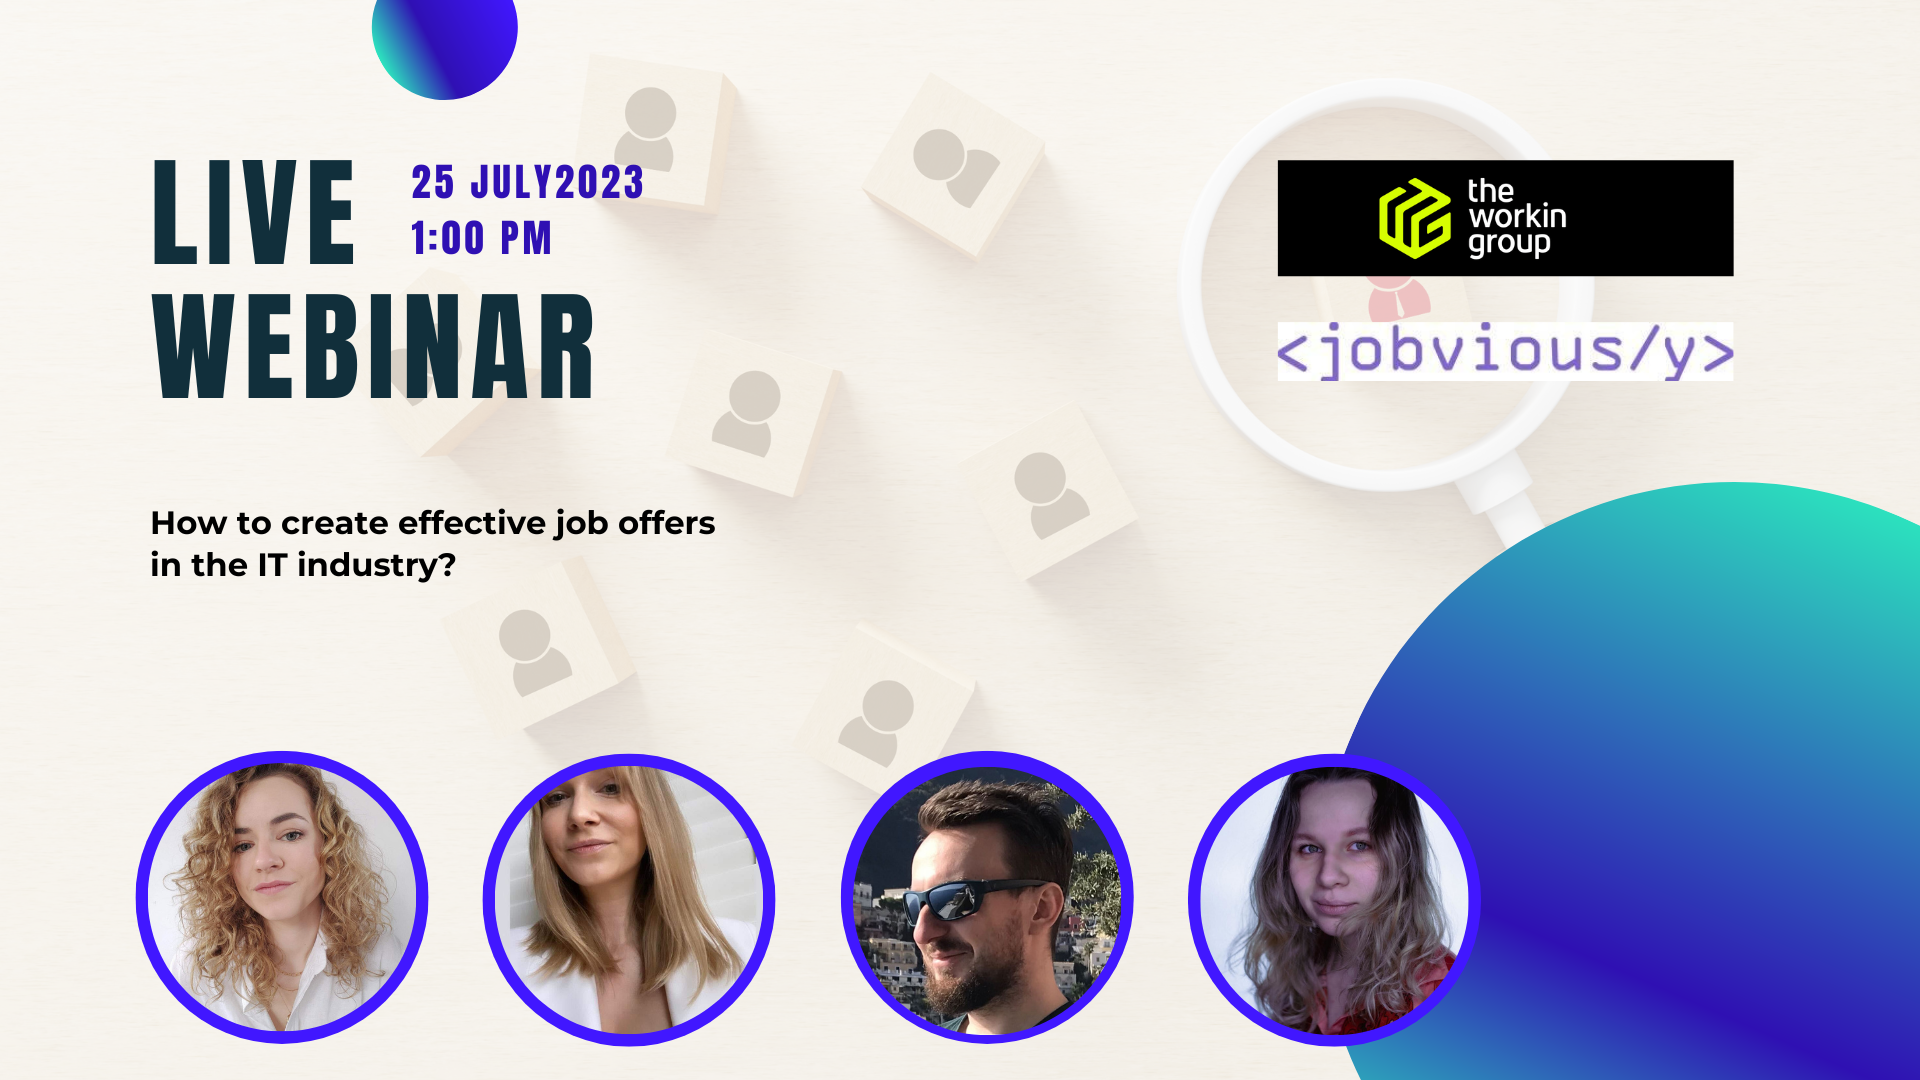 Live Webinar: How to create effective job offers in the IT industry?